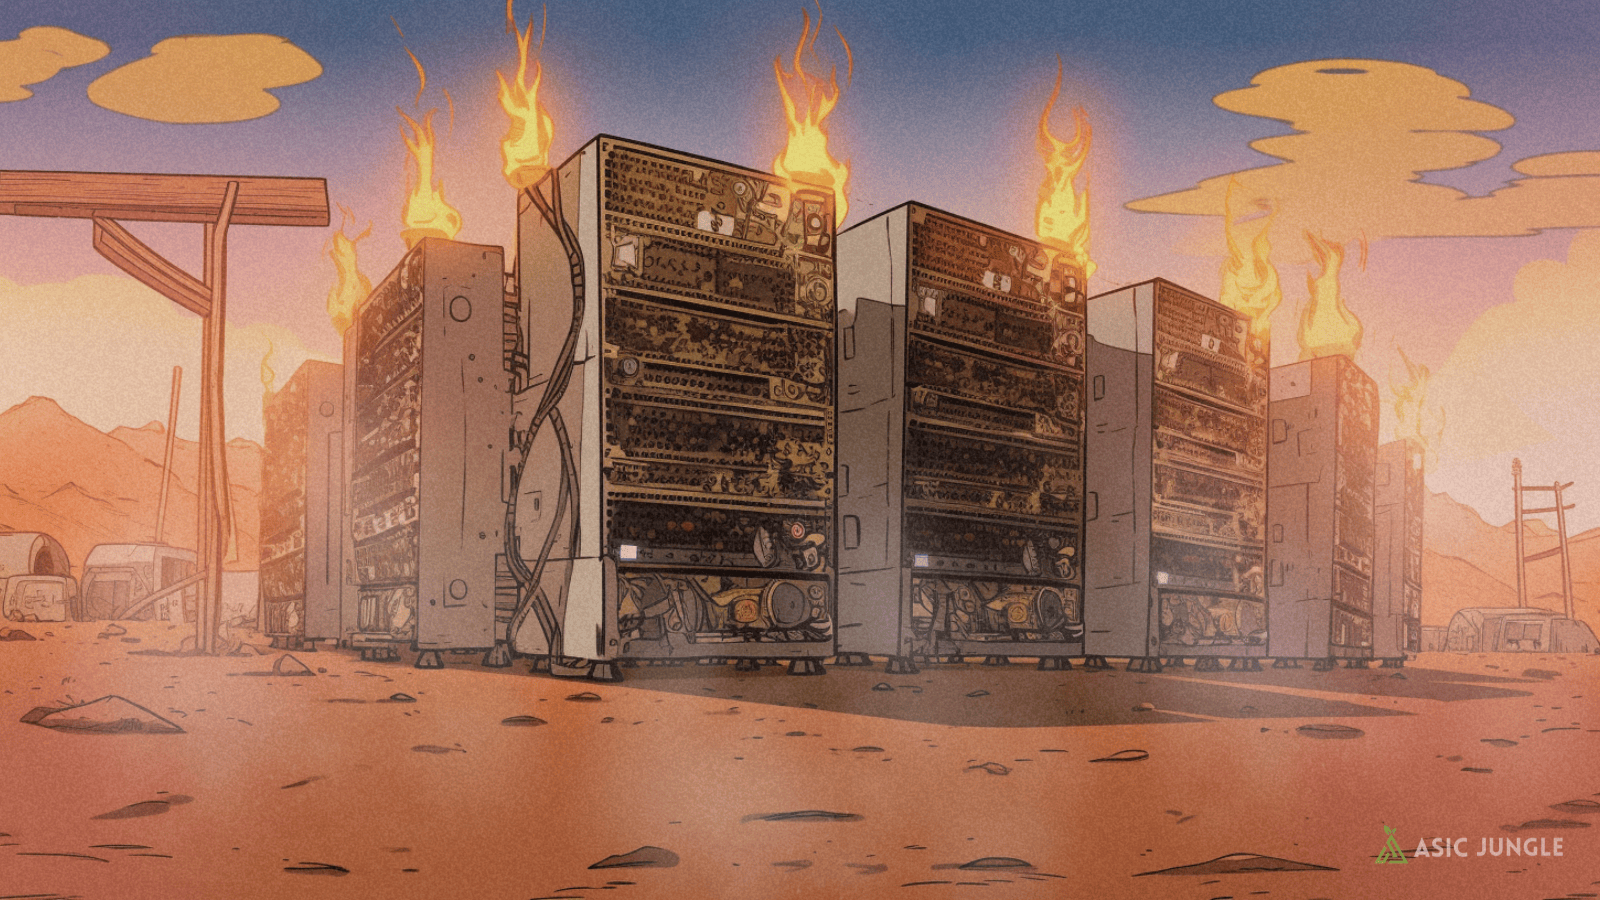 Bitcoin Mining Could Benefit From Flaring Waste Gas